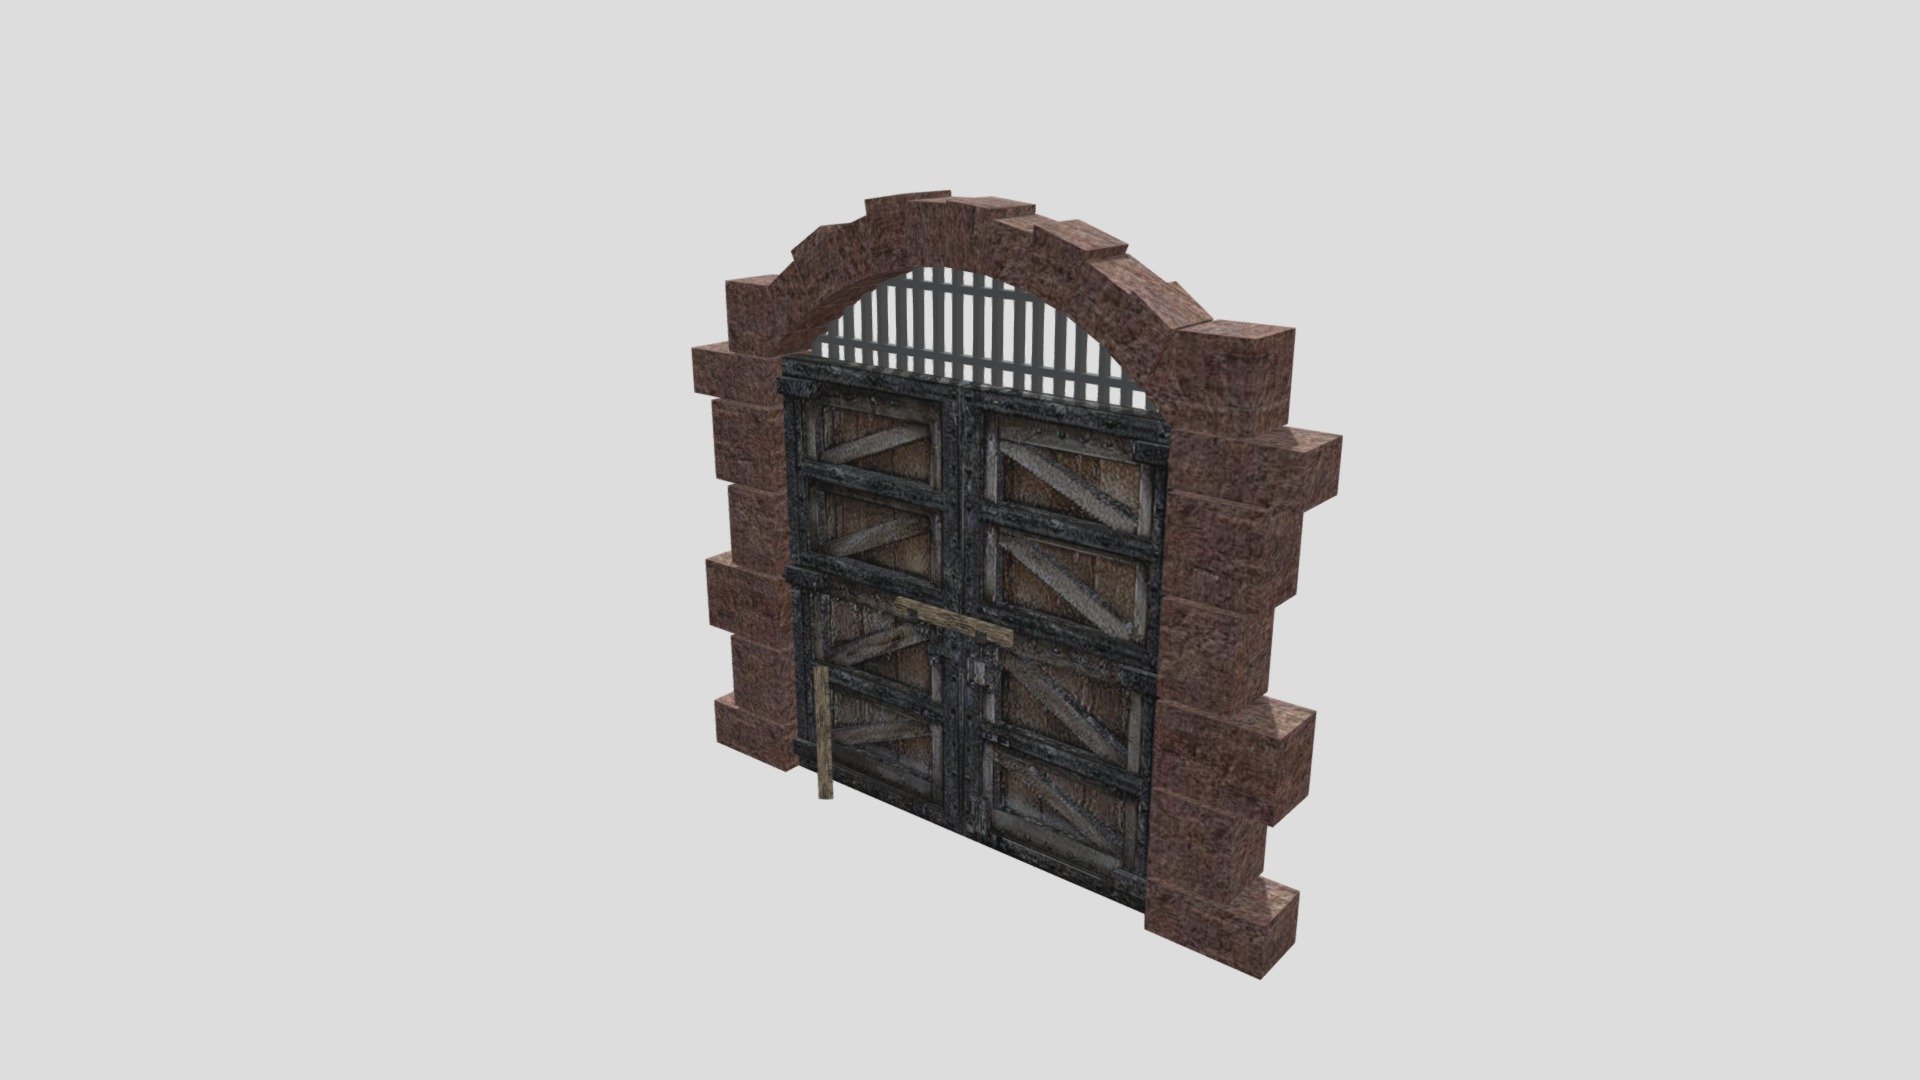 Back side Stone+Arch+Barn+Door 
Made with  * * * Sweethome3d * * * - Back side Stone+Arch+Barn+Door - 3D model by FD-paffie 3d model